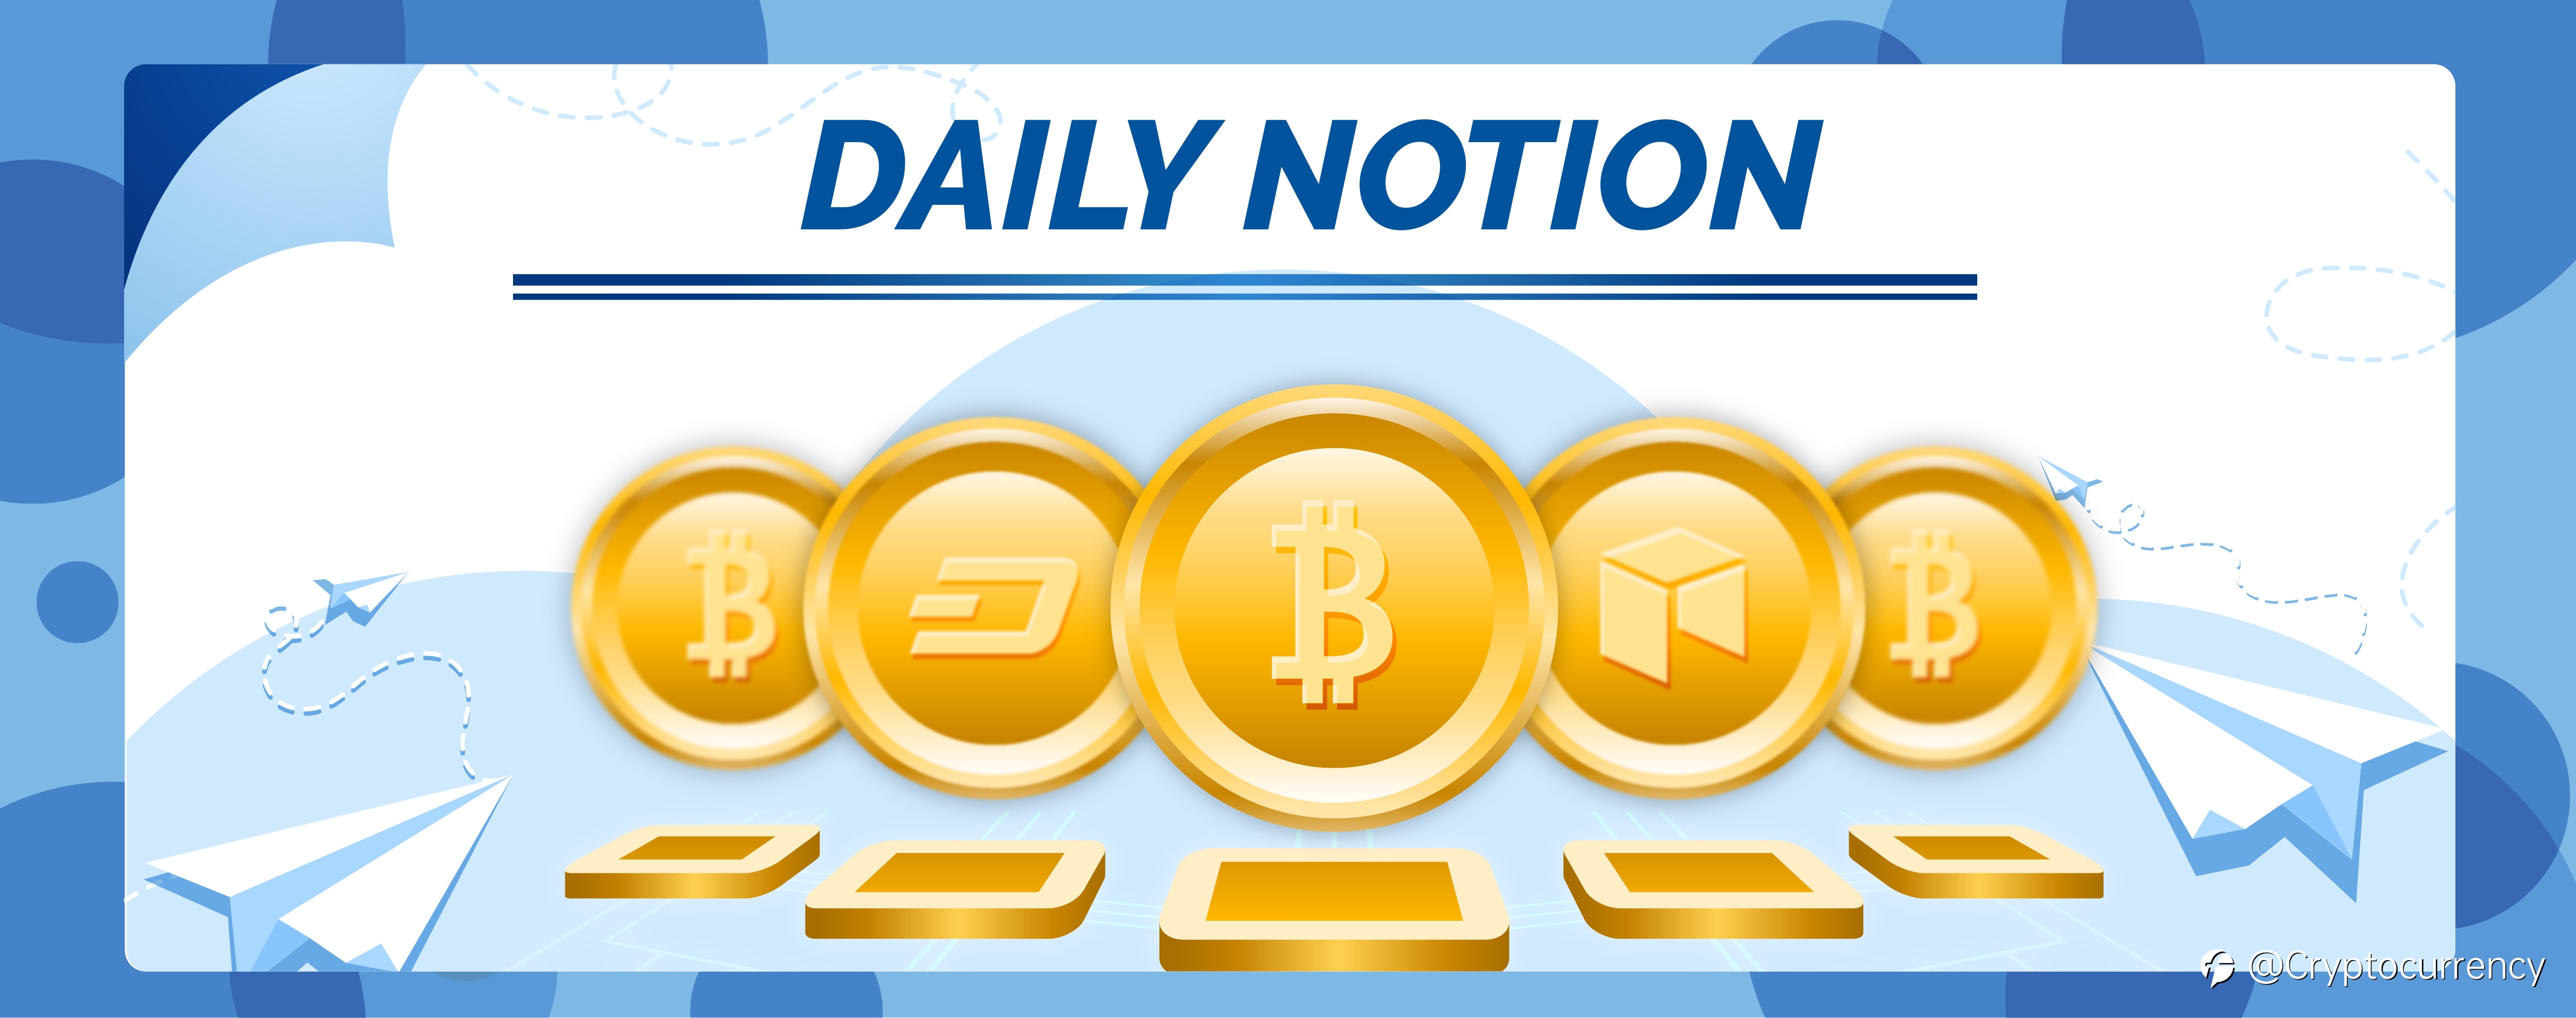 (DAILY NOTION): ETH/USD: Bulls Seem to Be Taking A Breather, Will the Bears Resurface?